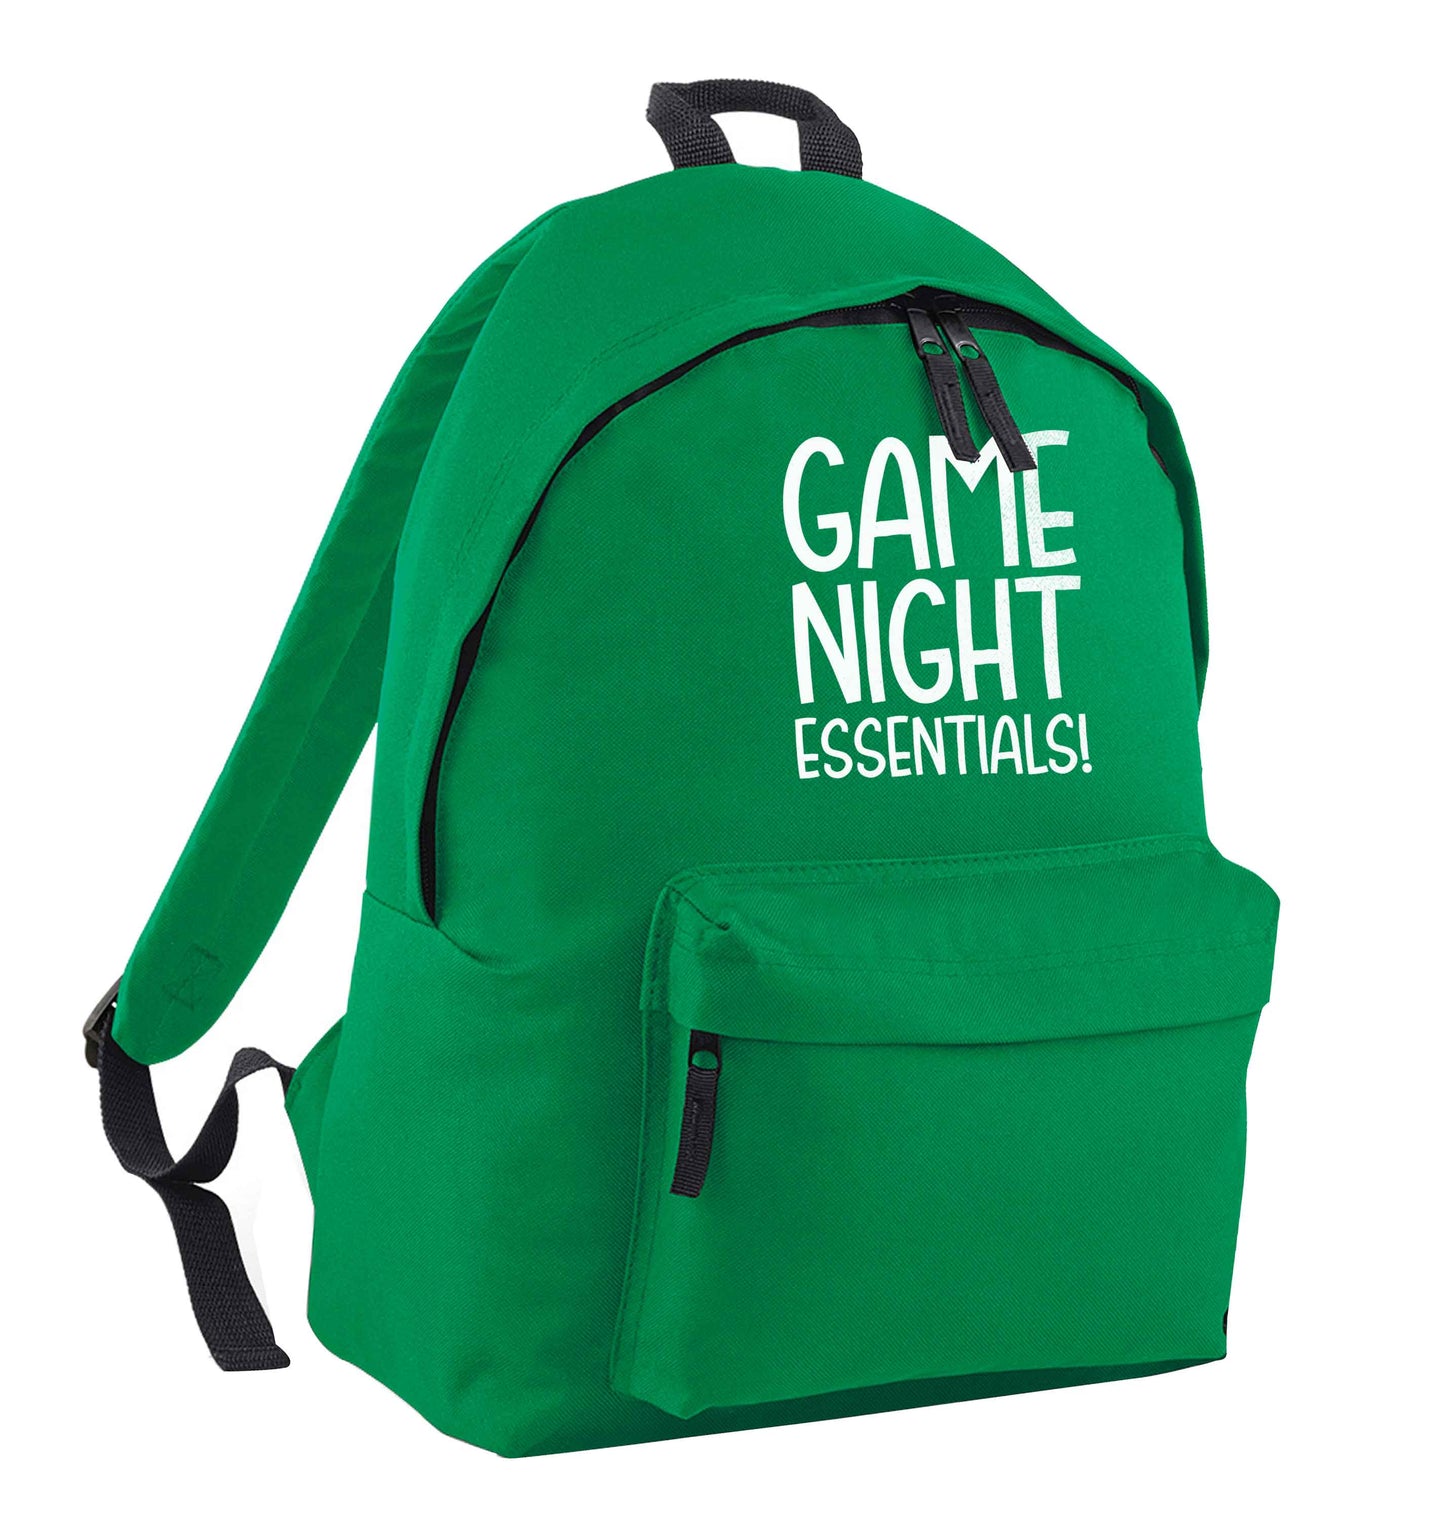 Game night essentials green adults backpack